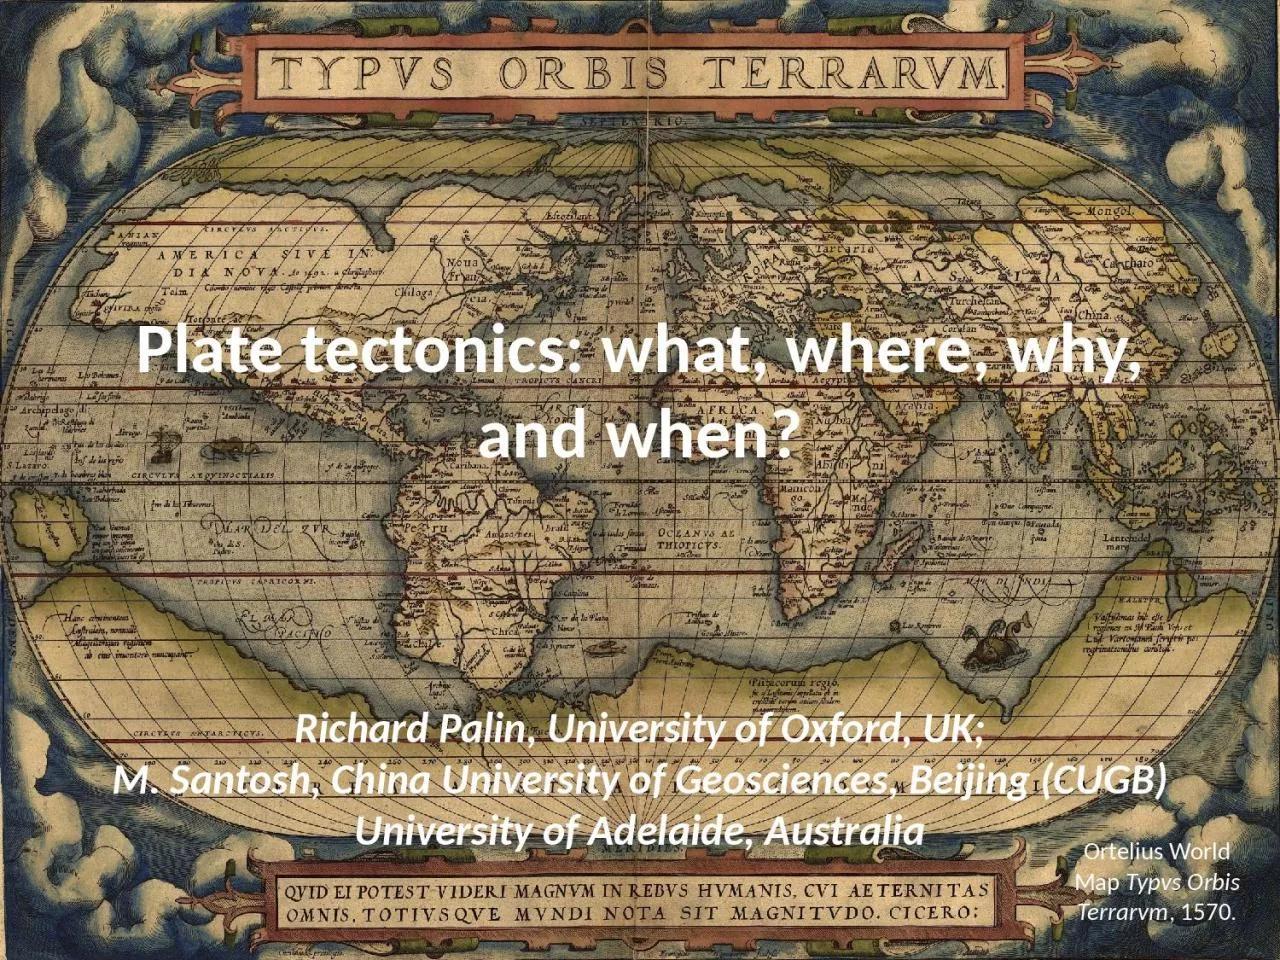 Plate tectonics: what, where, why, and when?